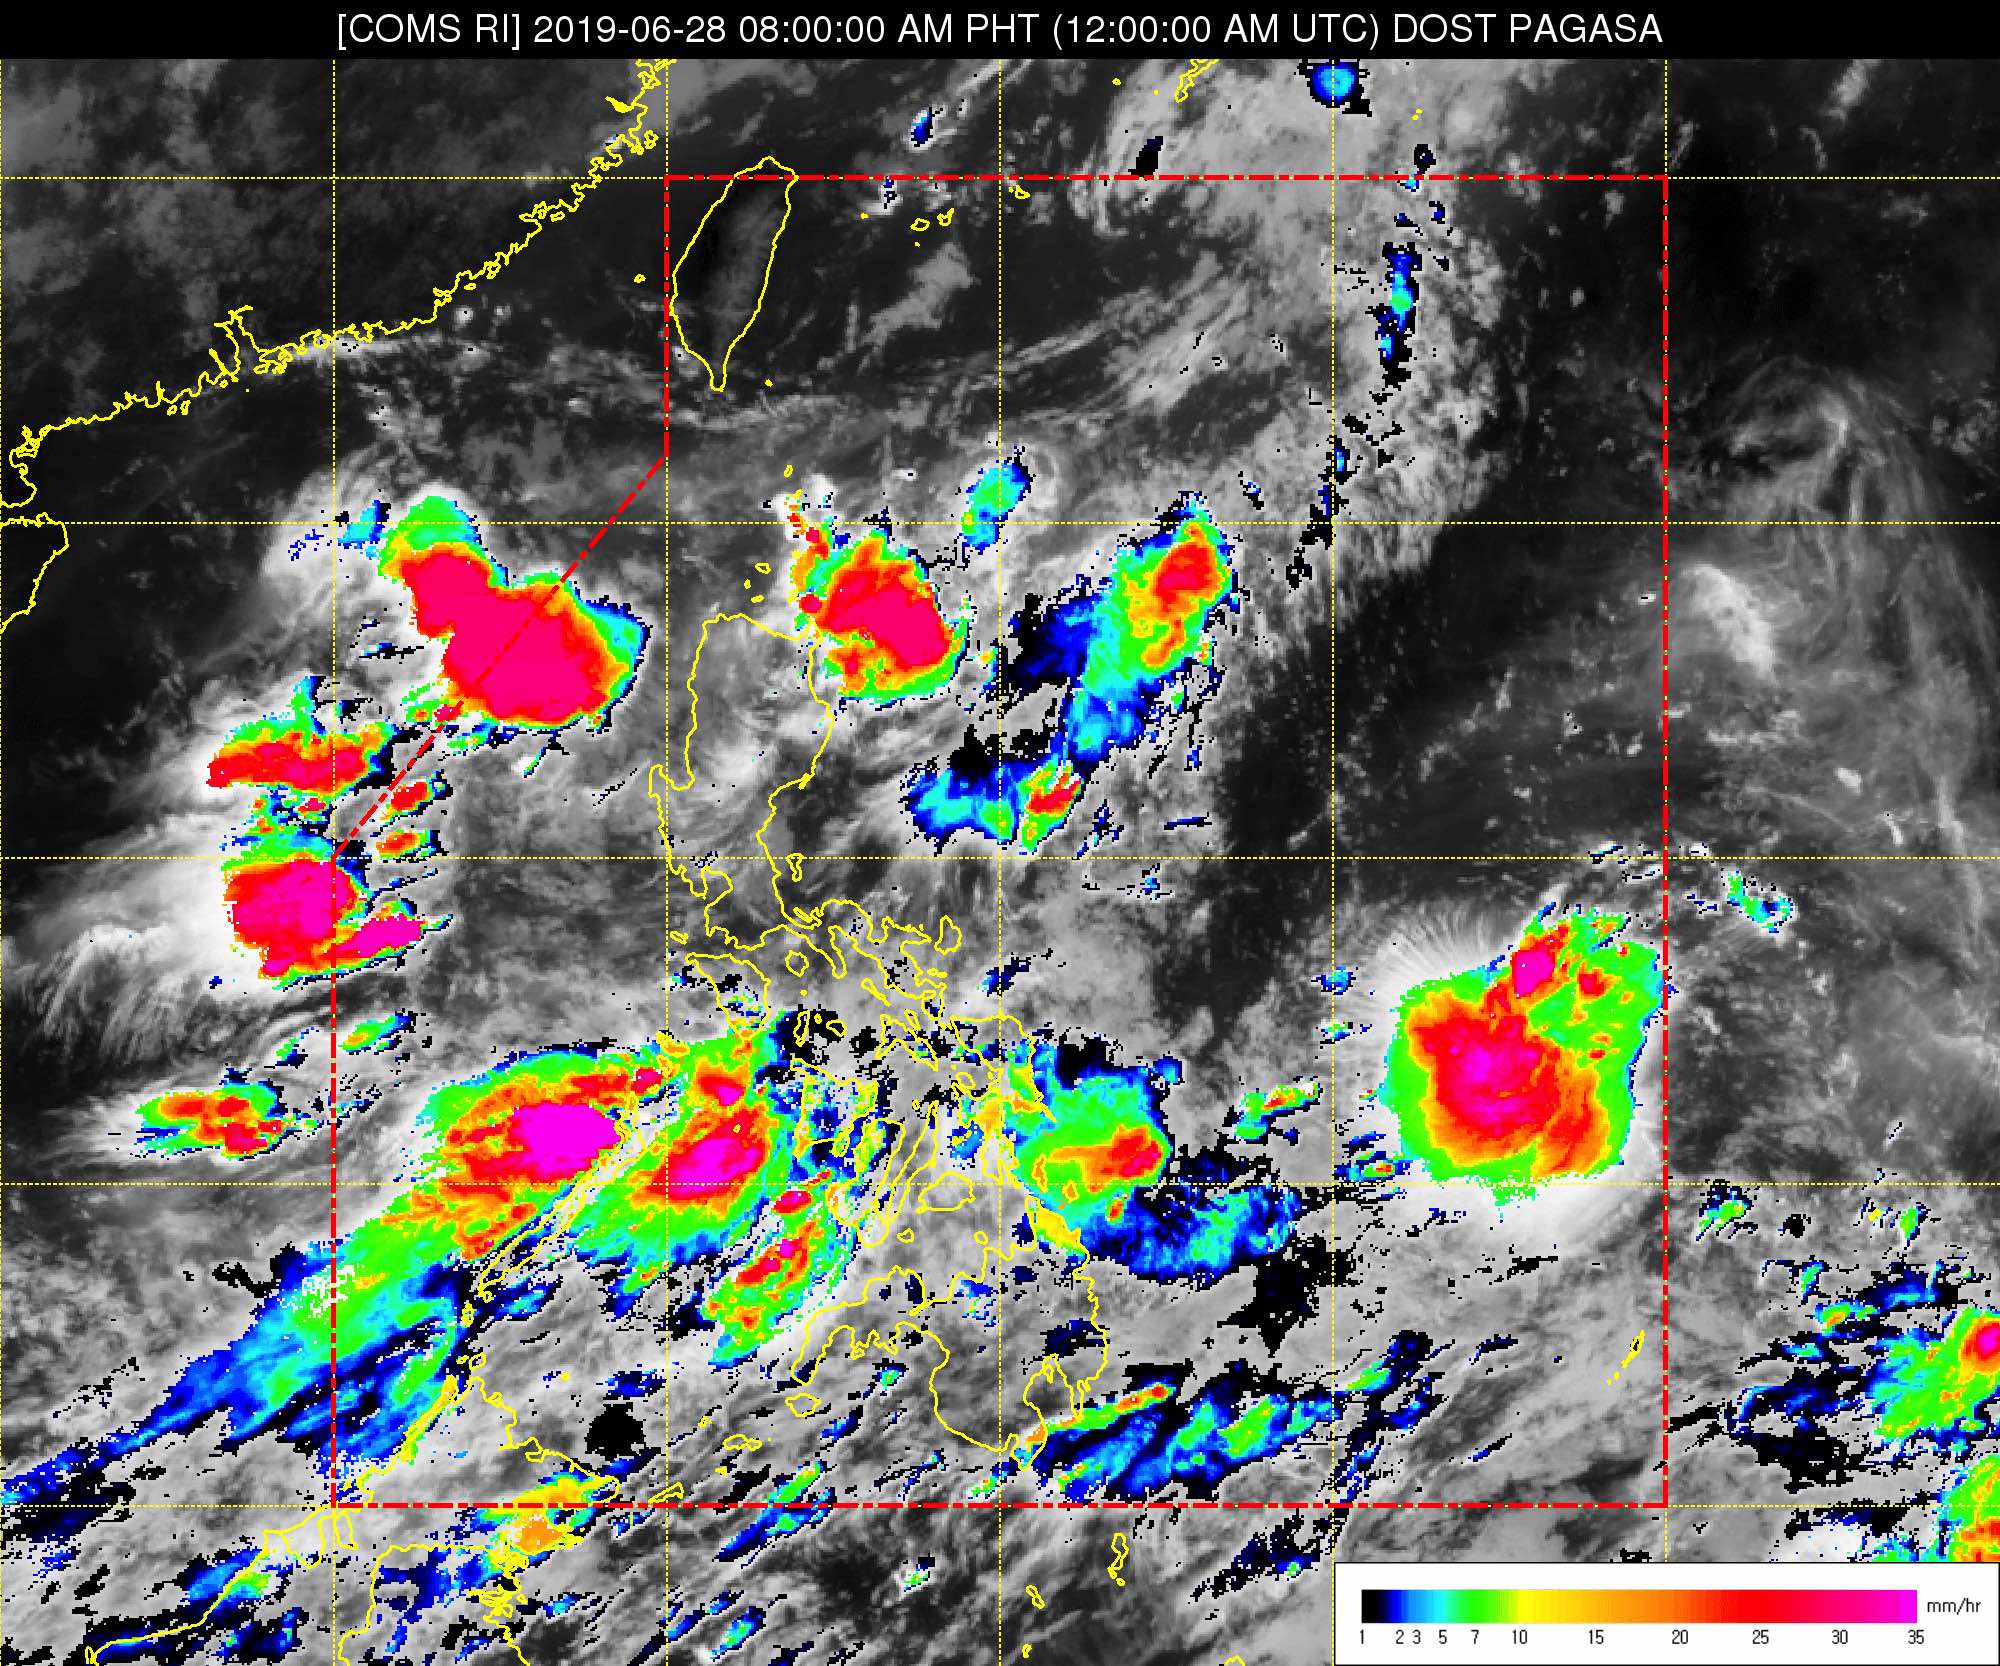 Satellite image as of June 28, 2019, 8 am. Image from PAGASA 